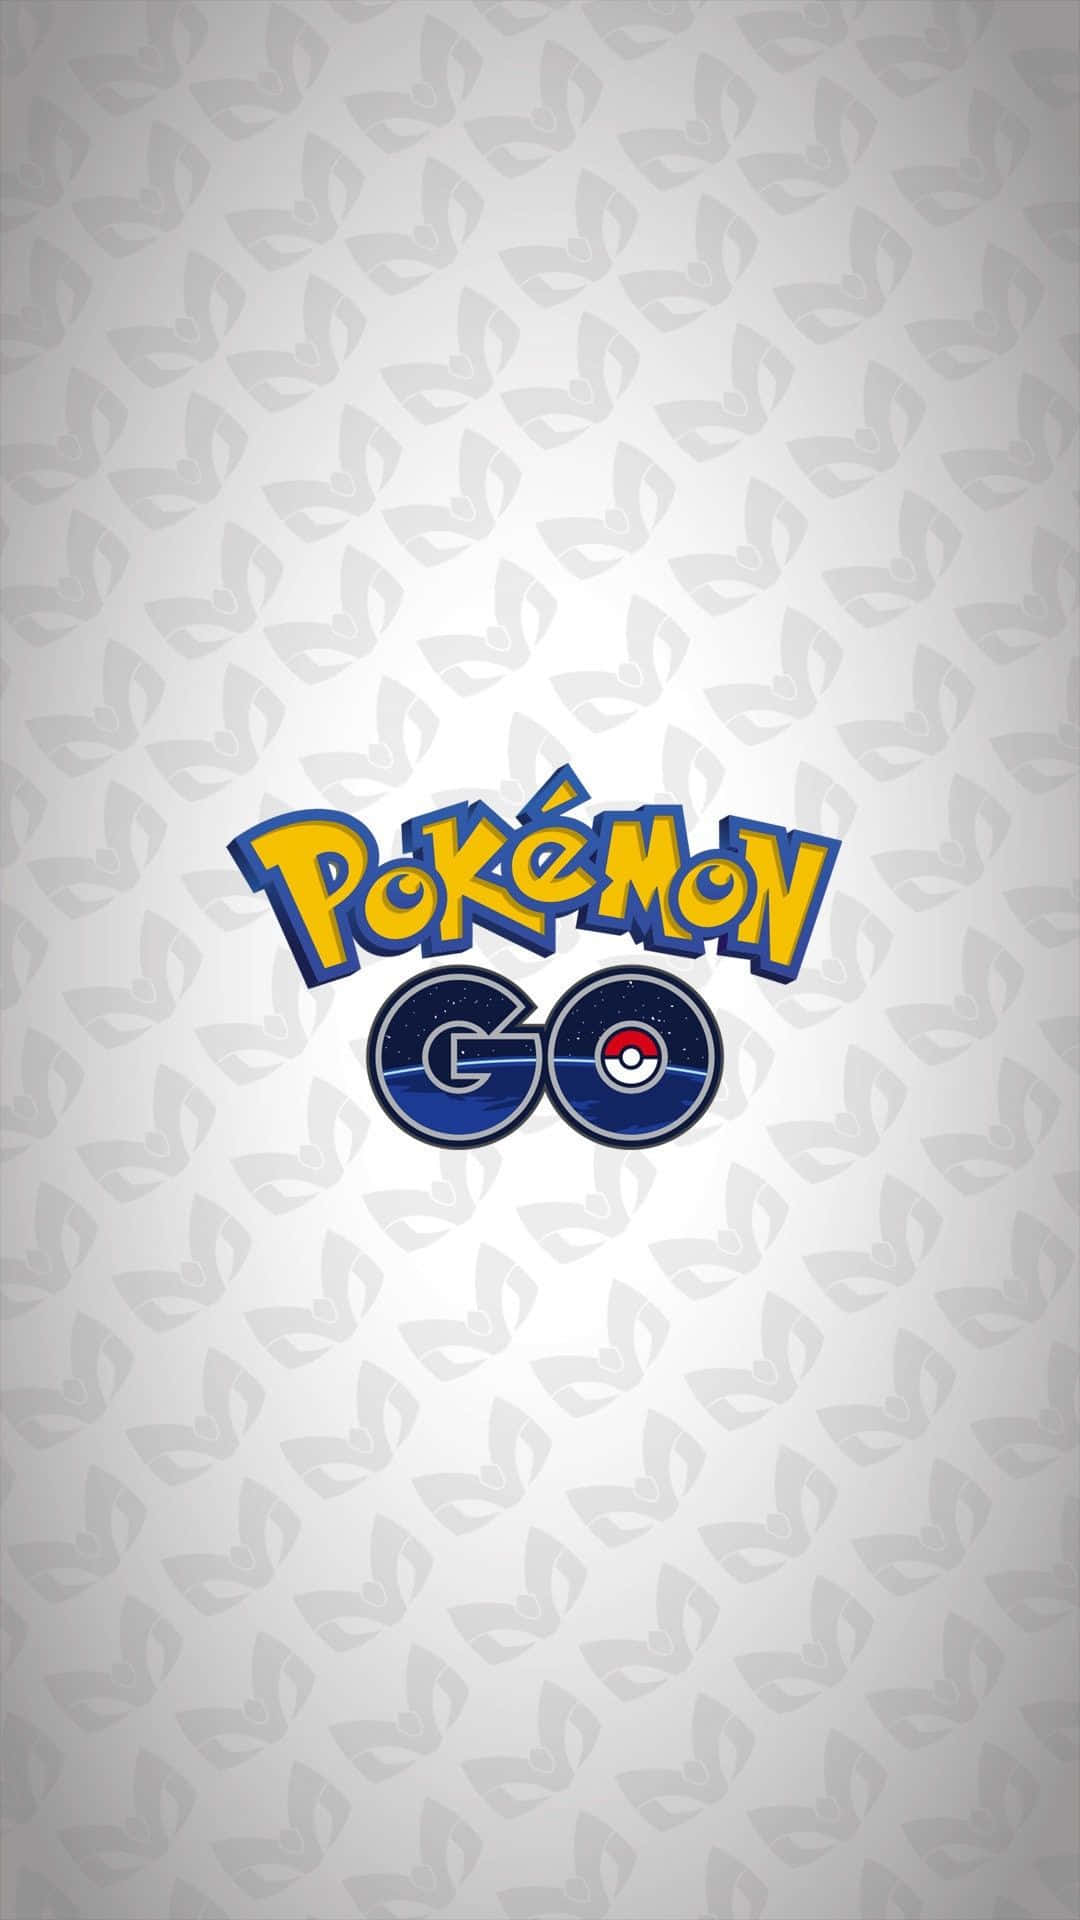 Pokemon Go Wallpapers - Hd Wallpapers Background